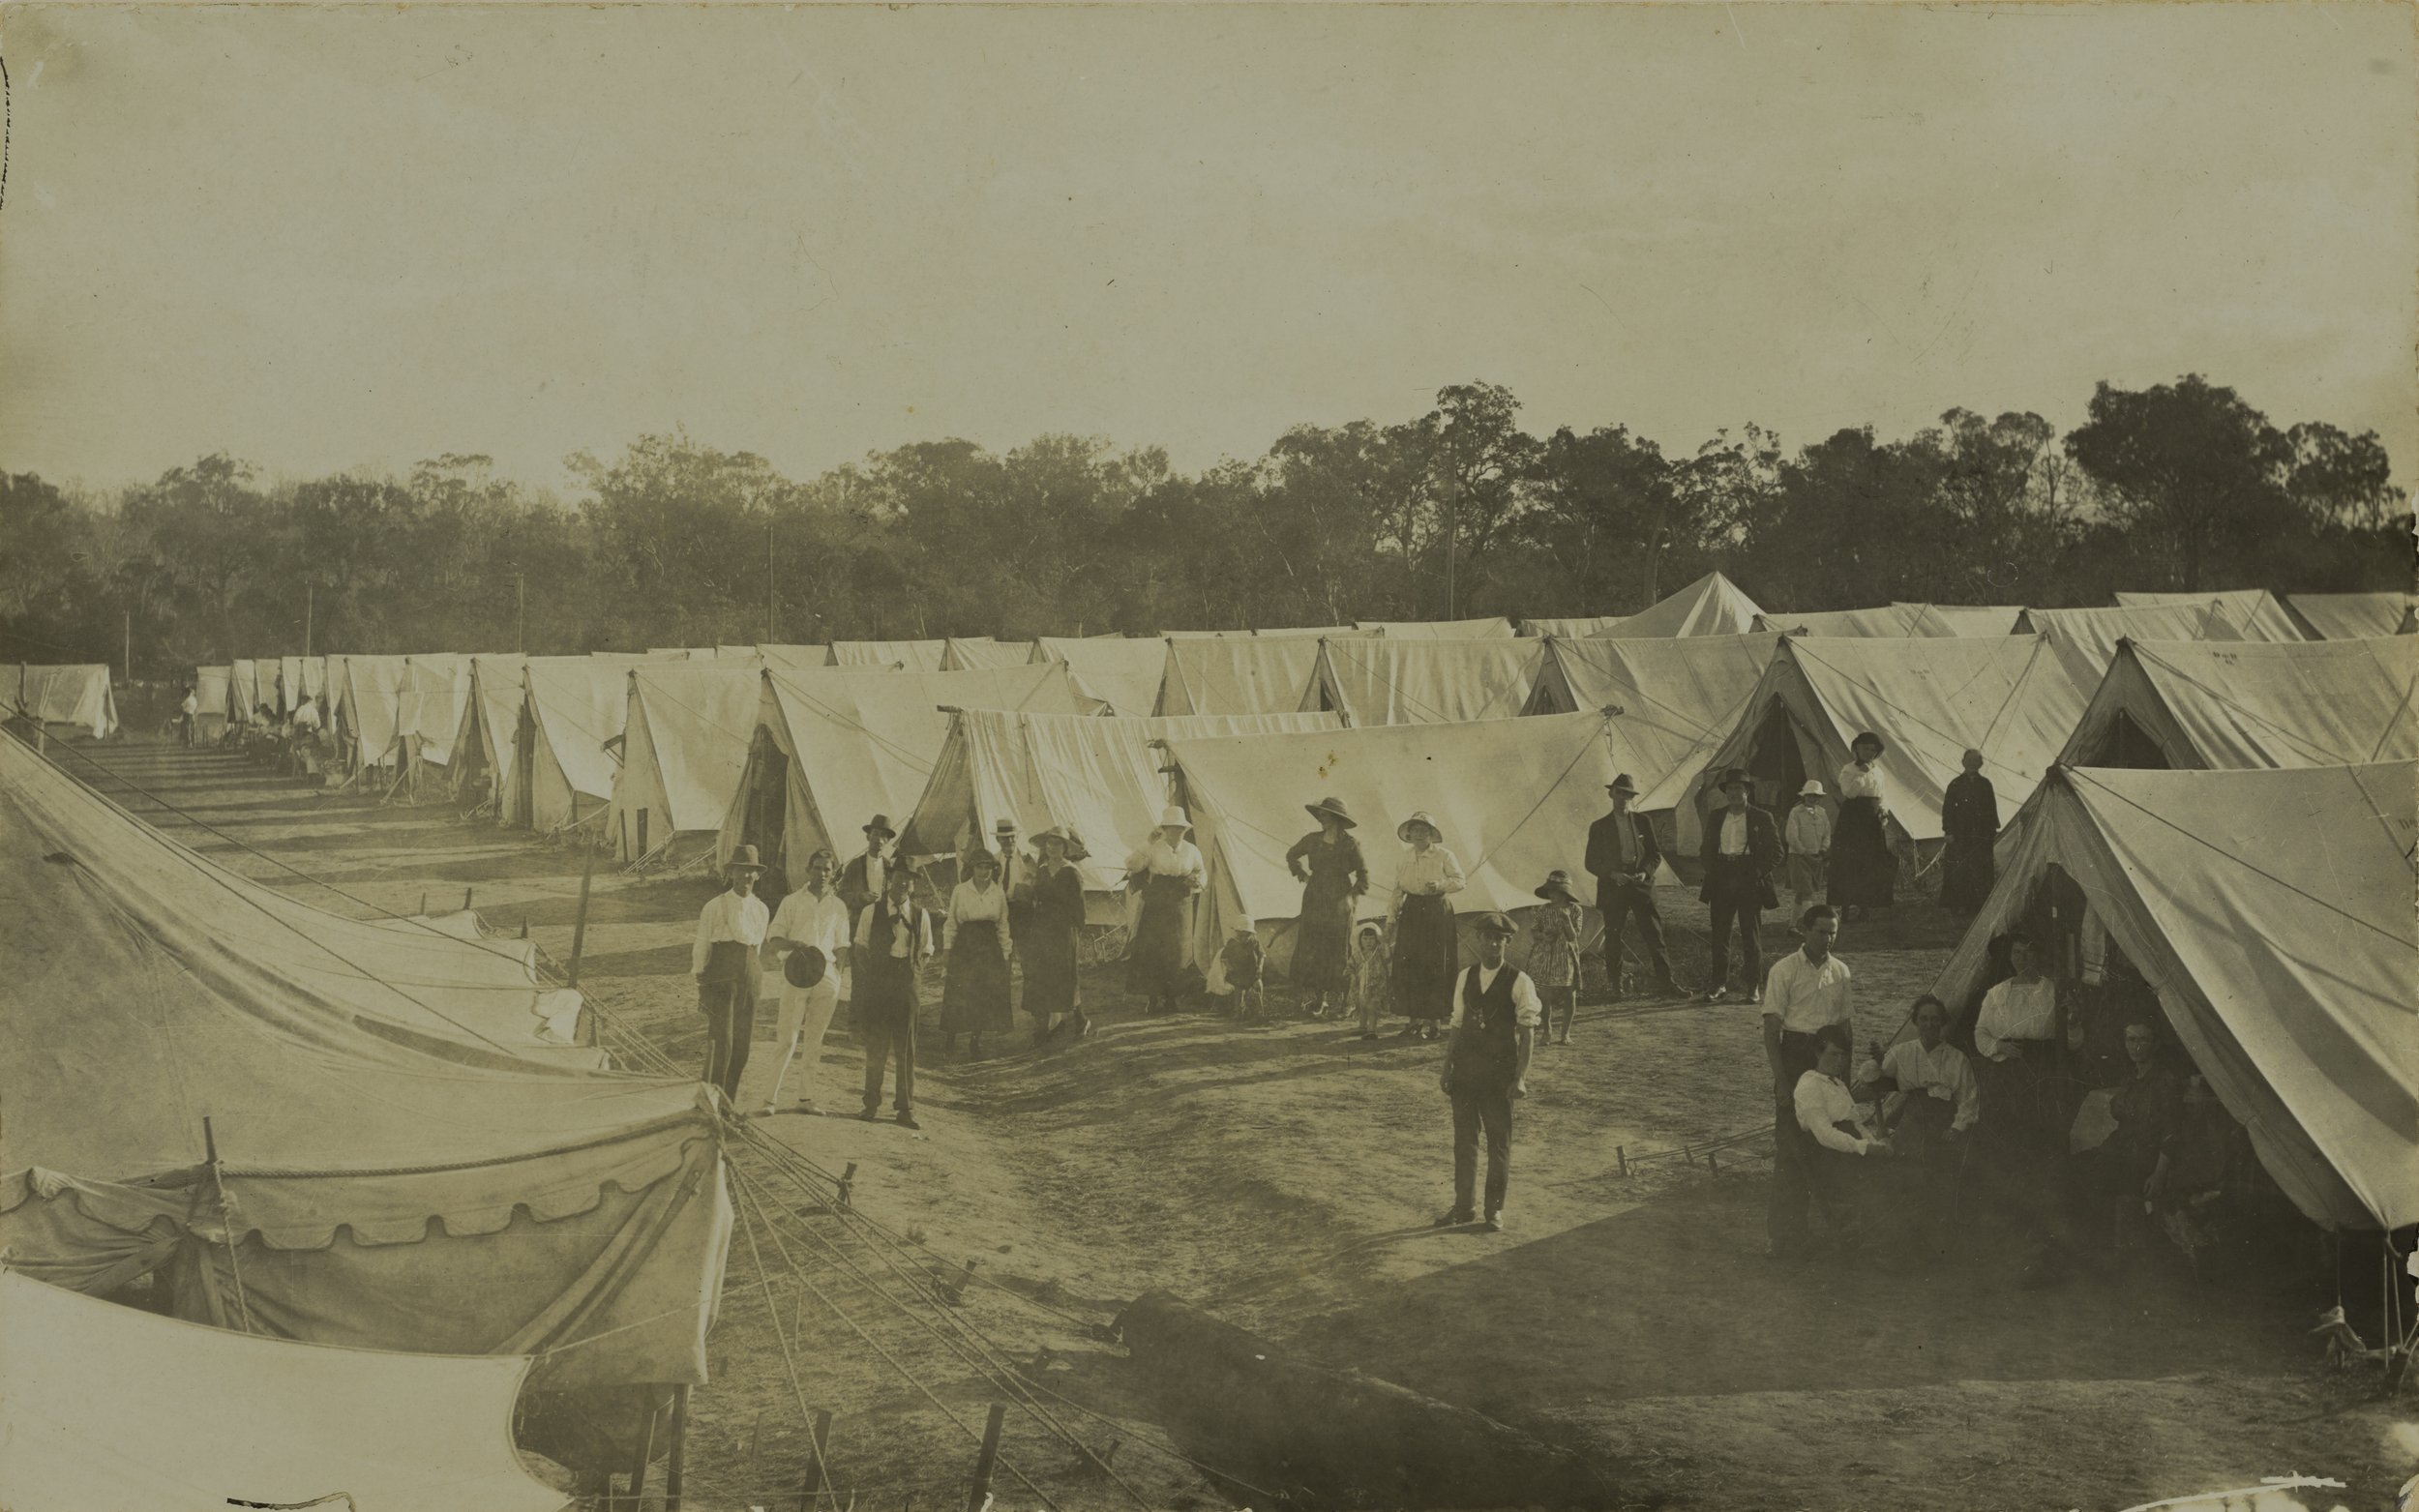 Groups of people standing around rows of tents at the Wallangarra Quarantine camp, May 1919 SLQ.jpg